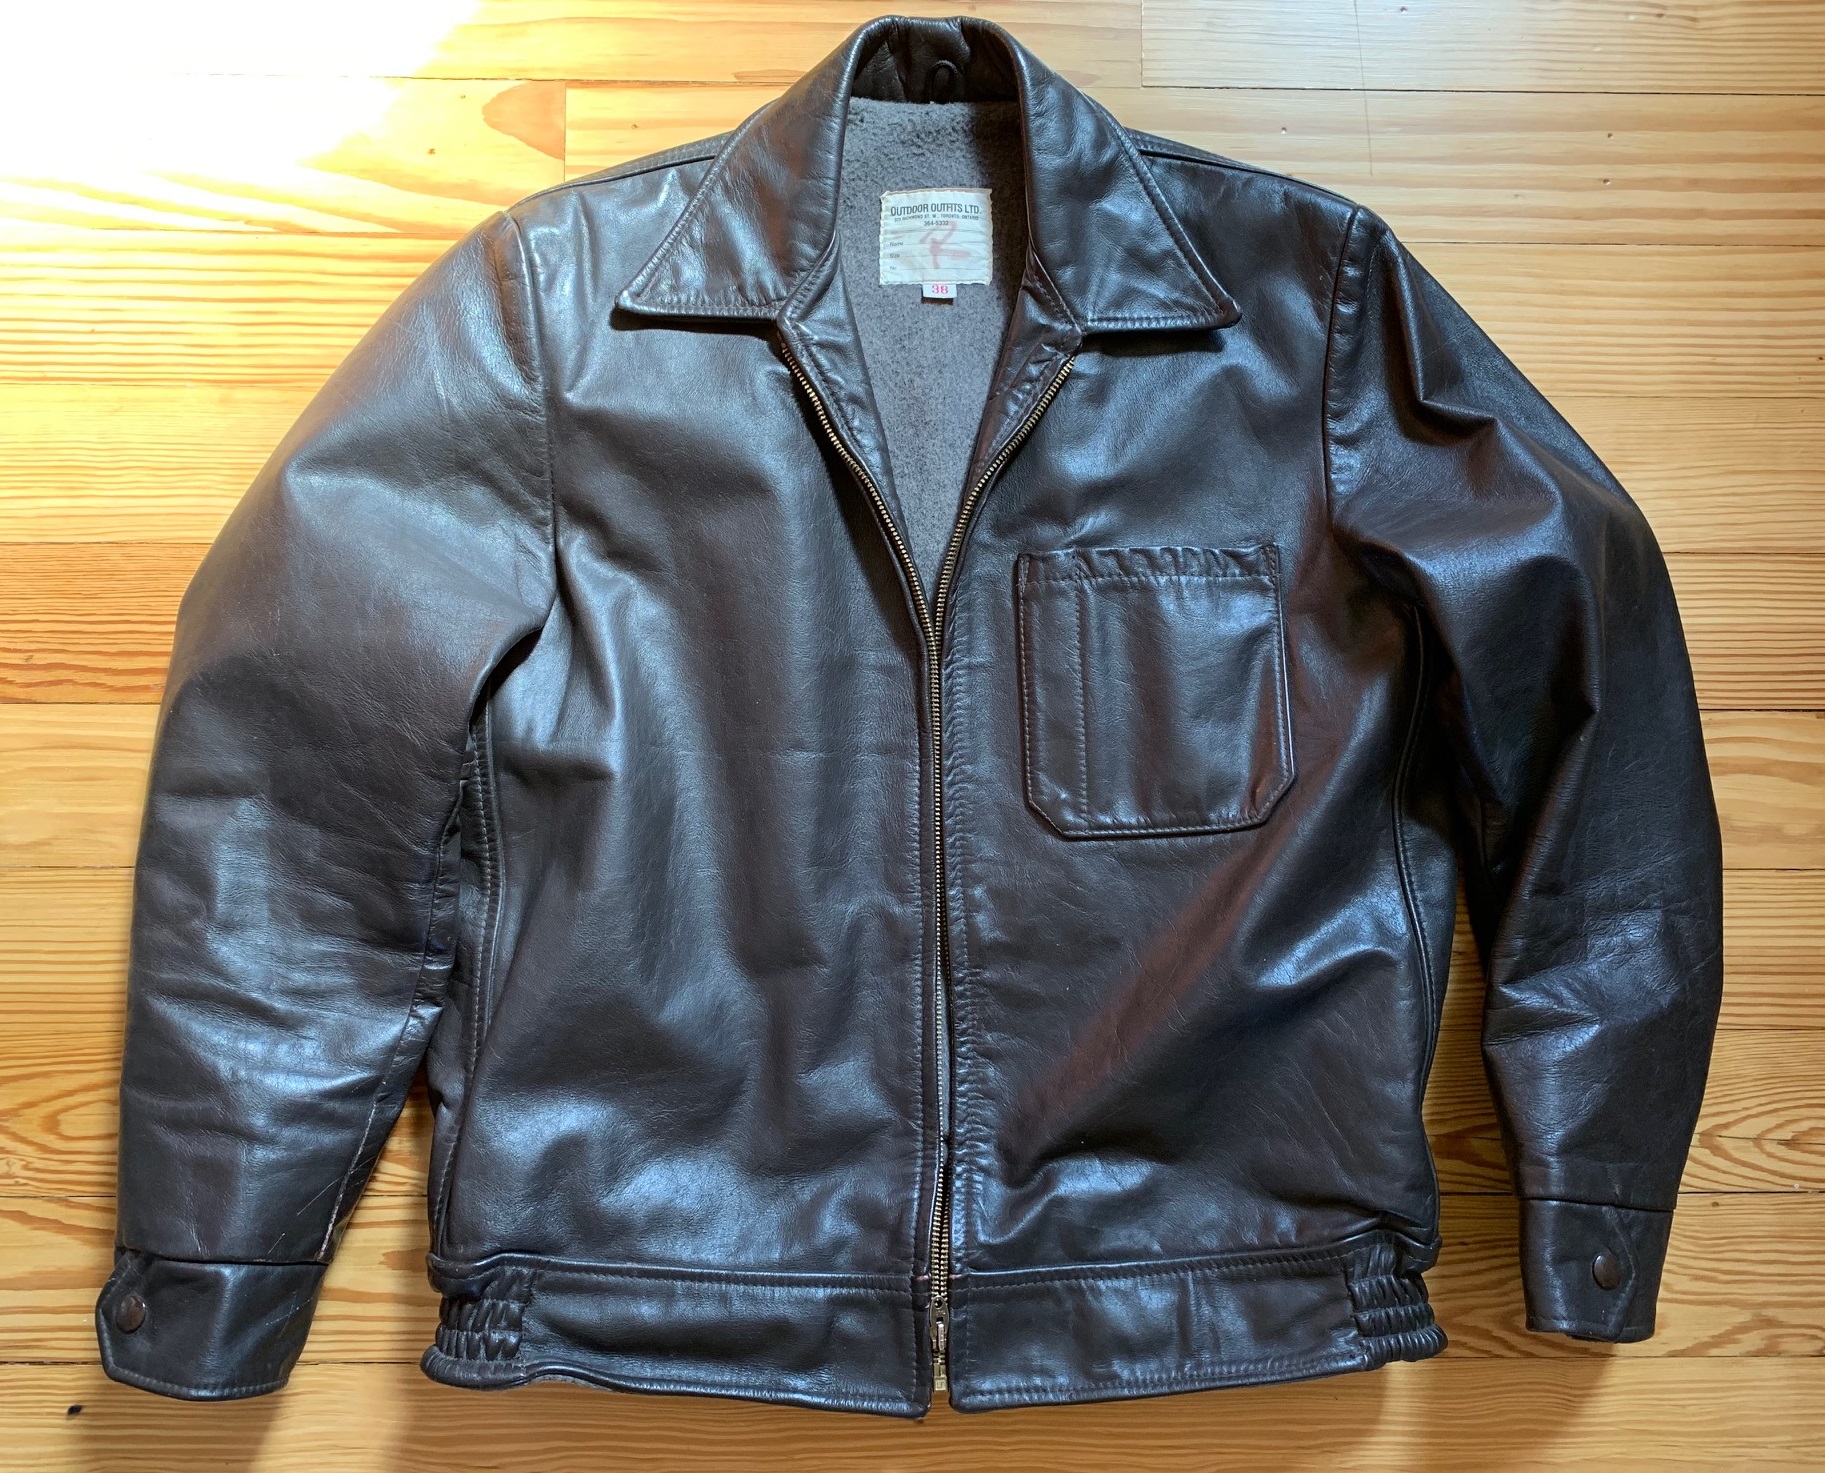 New Old Stock find - Chicago Police jacket in Blue steer | The Fedora ...